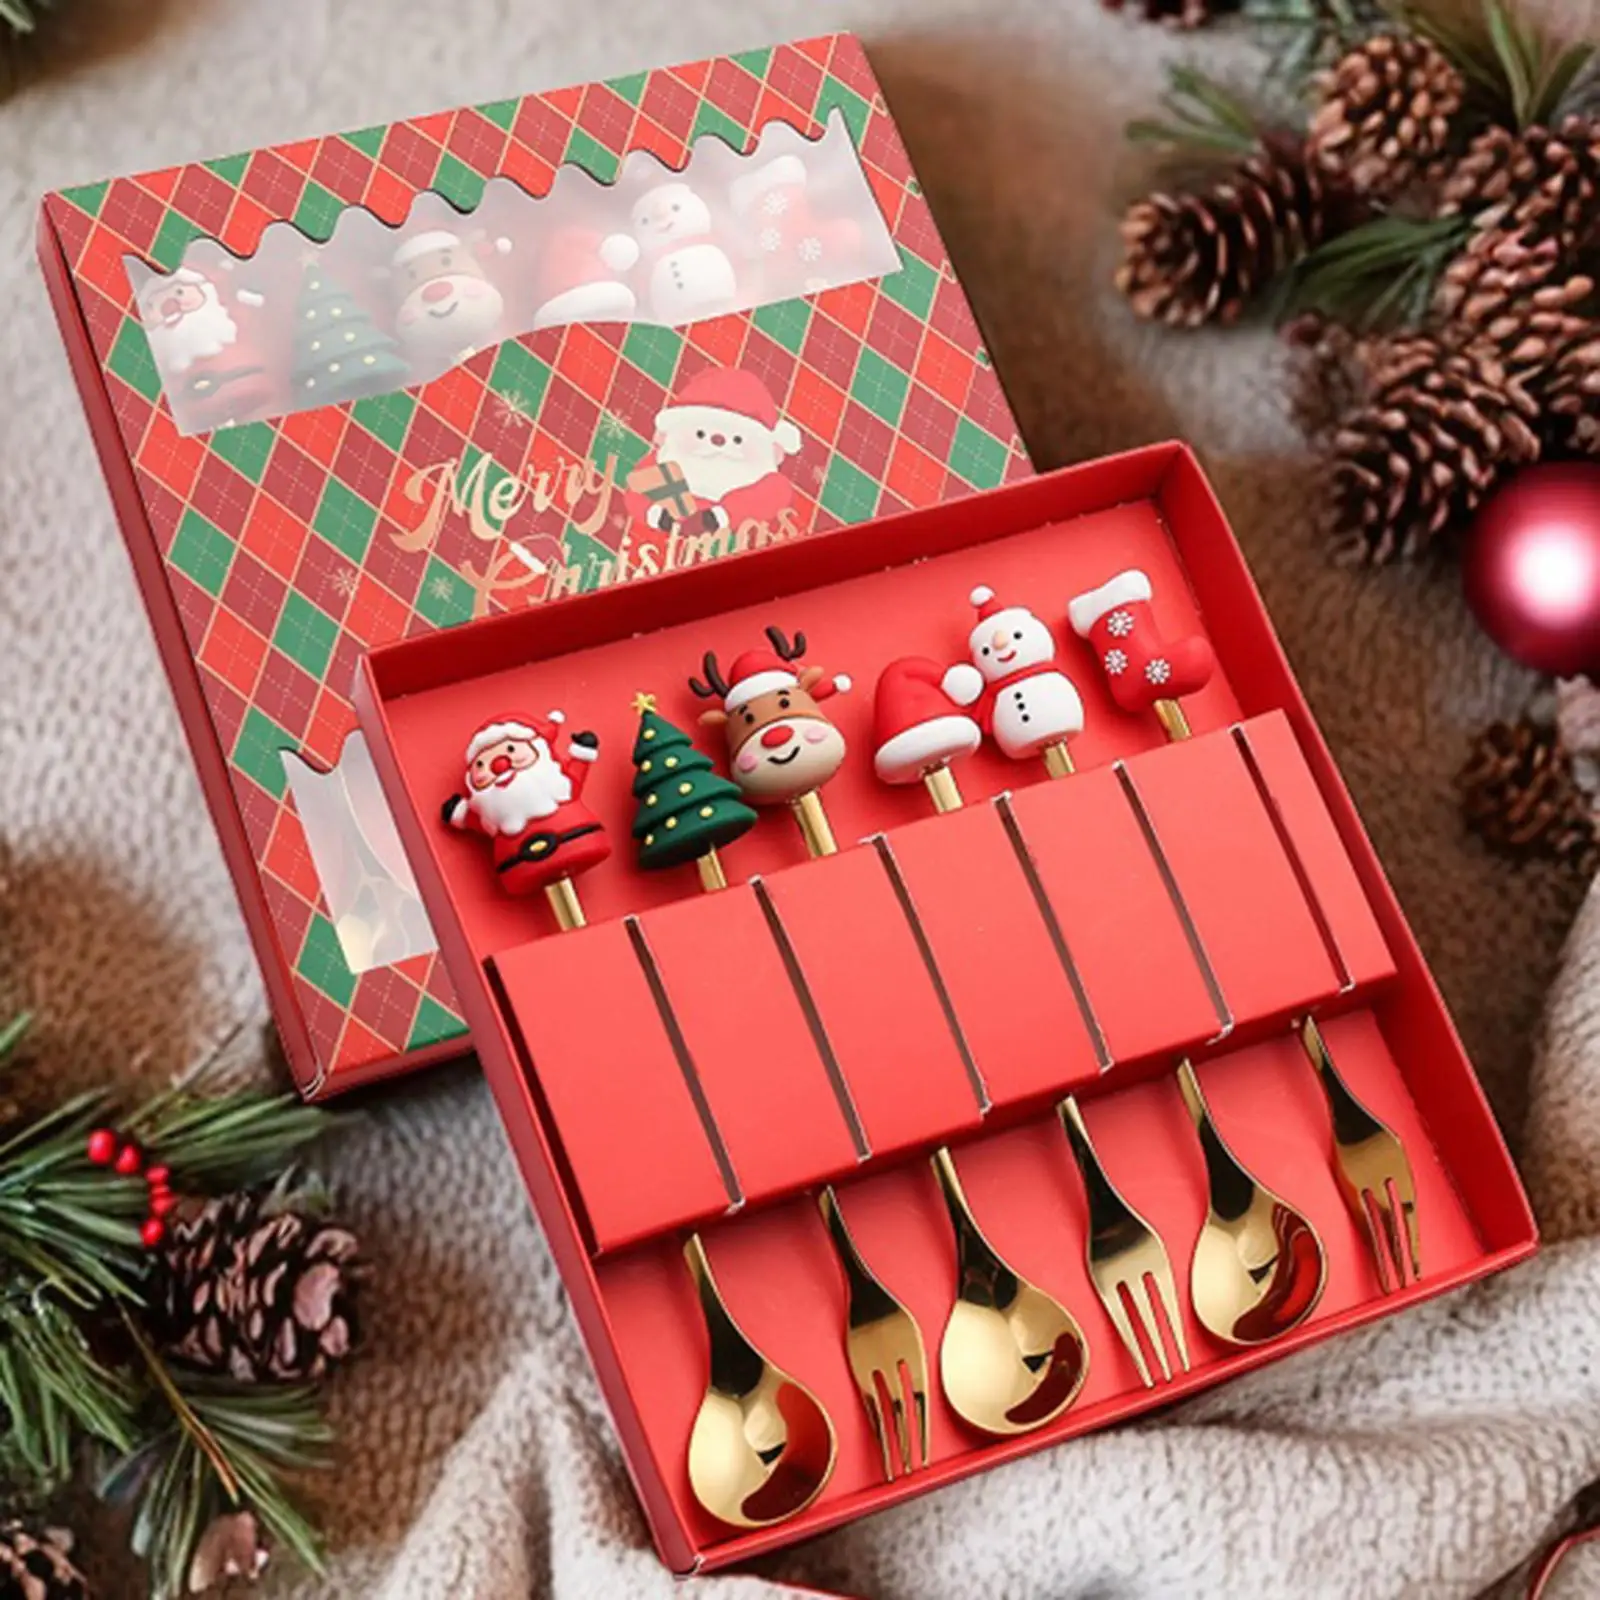 6x Xmas Cutlery Kits Christmas Spoons Forks Set for Party Wedding Restaurant